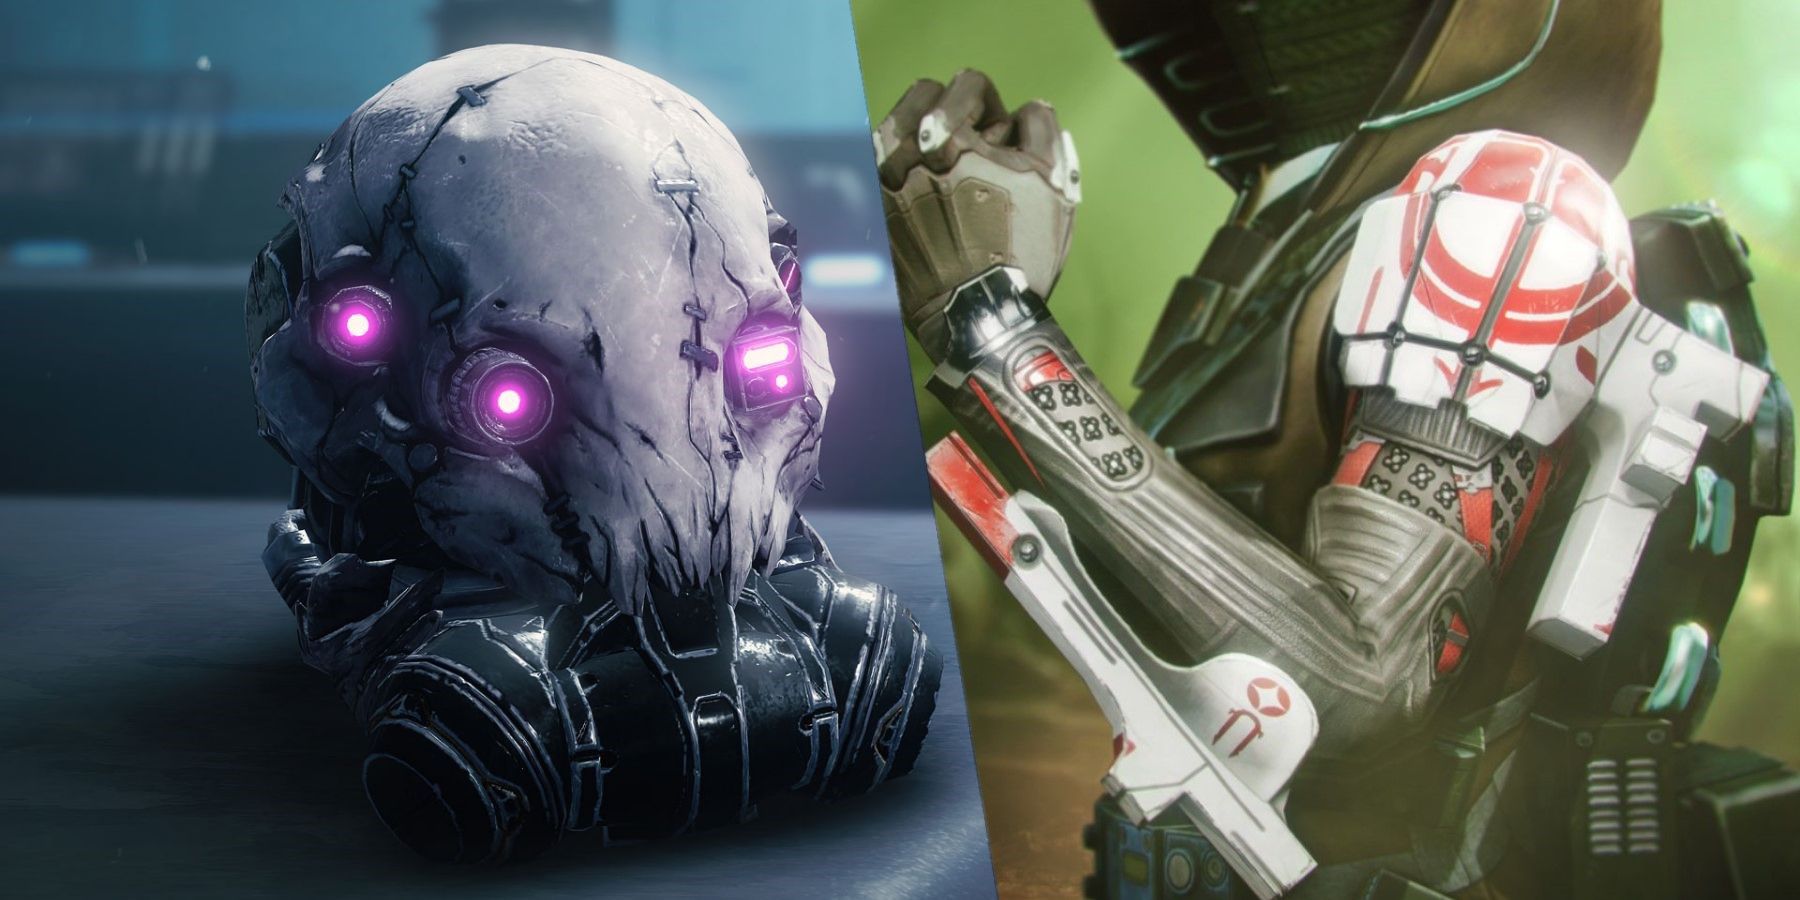 destiny 2 witch queen hunter exotic items renewal grasps nerfs exotics too niche and focused on pvp content not pve endgame